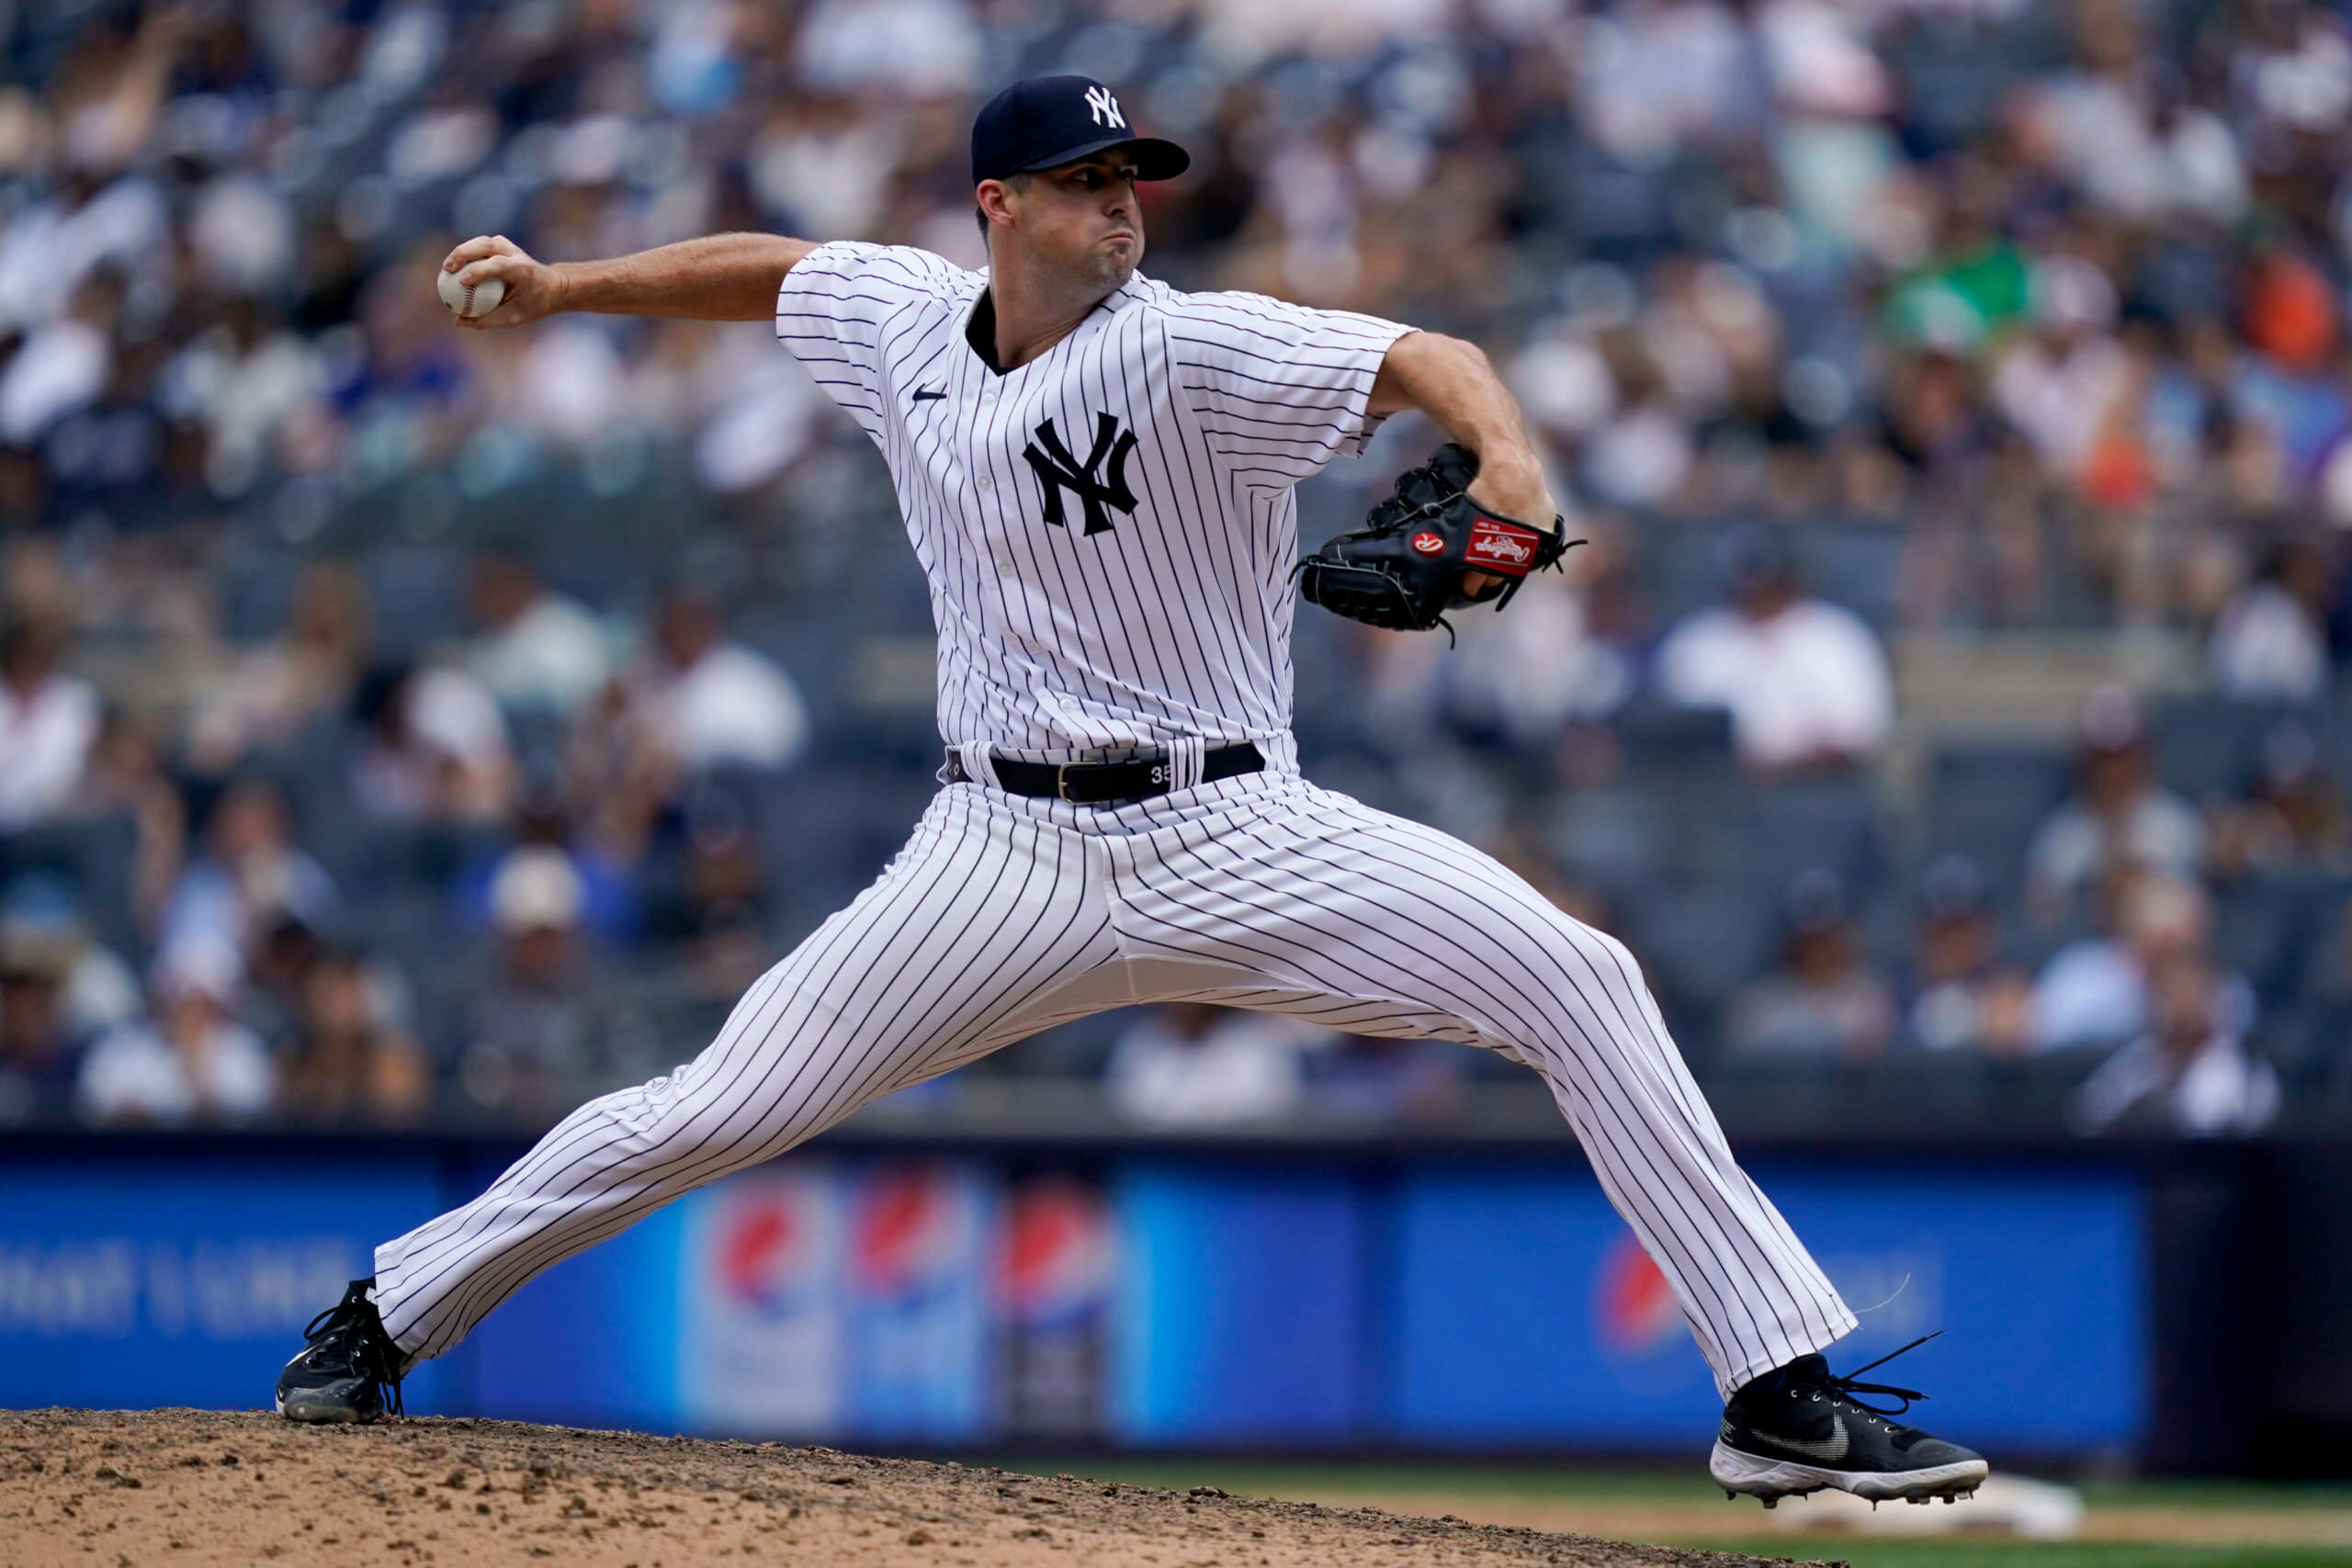 Whether in 9th or not, Clay Holmes ready to help Yanks in any role